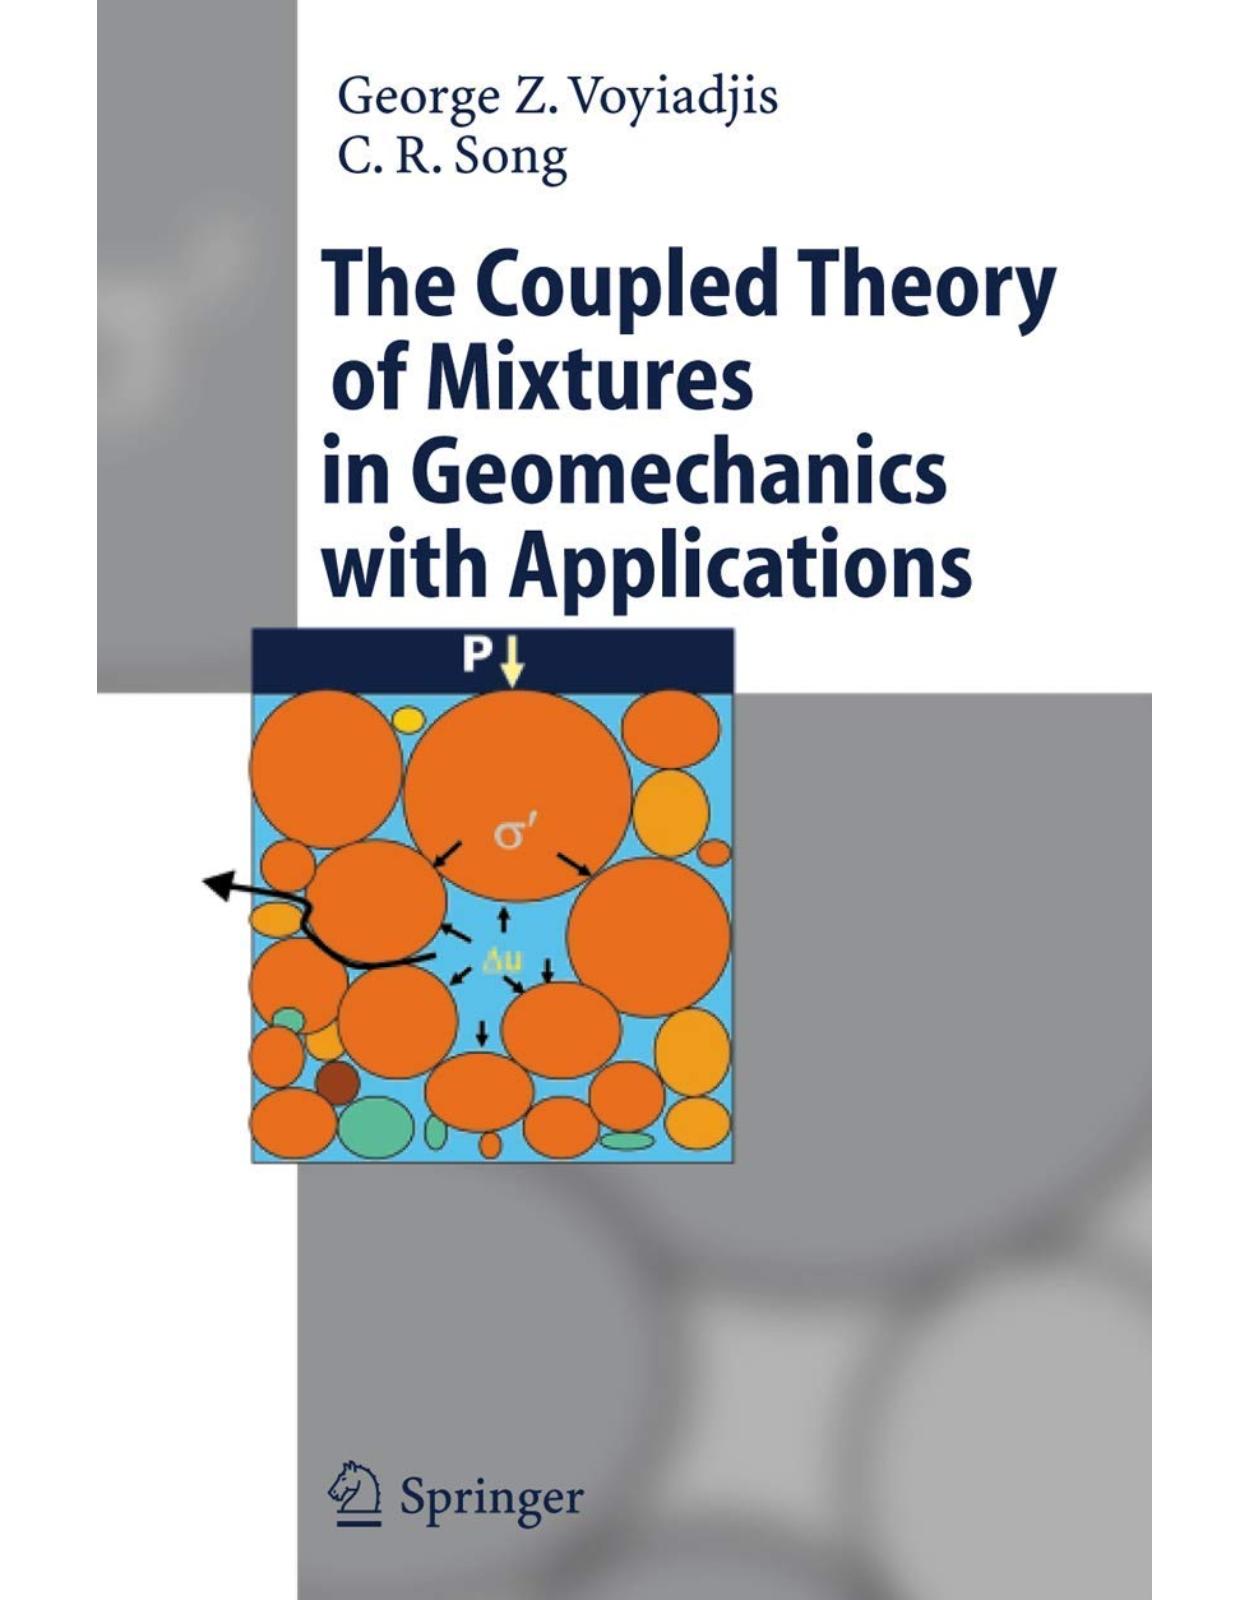 The Coupled Theory of Mixtures in Geomechanics with Applications